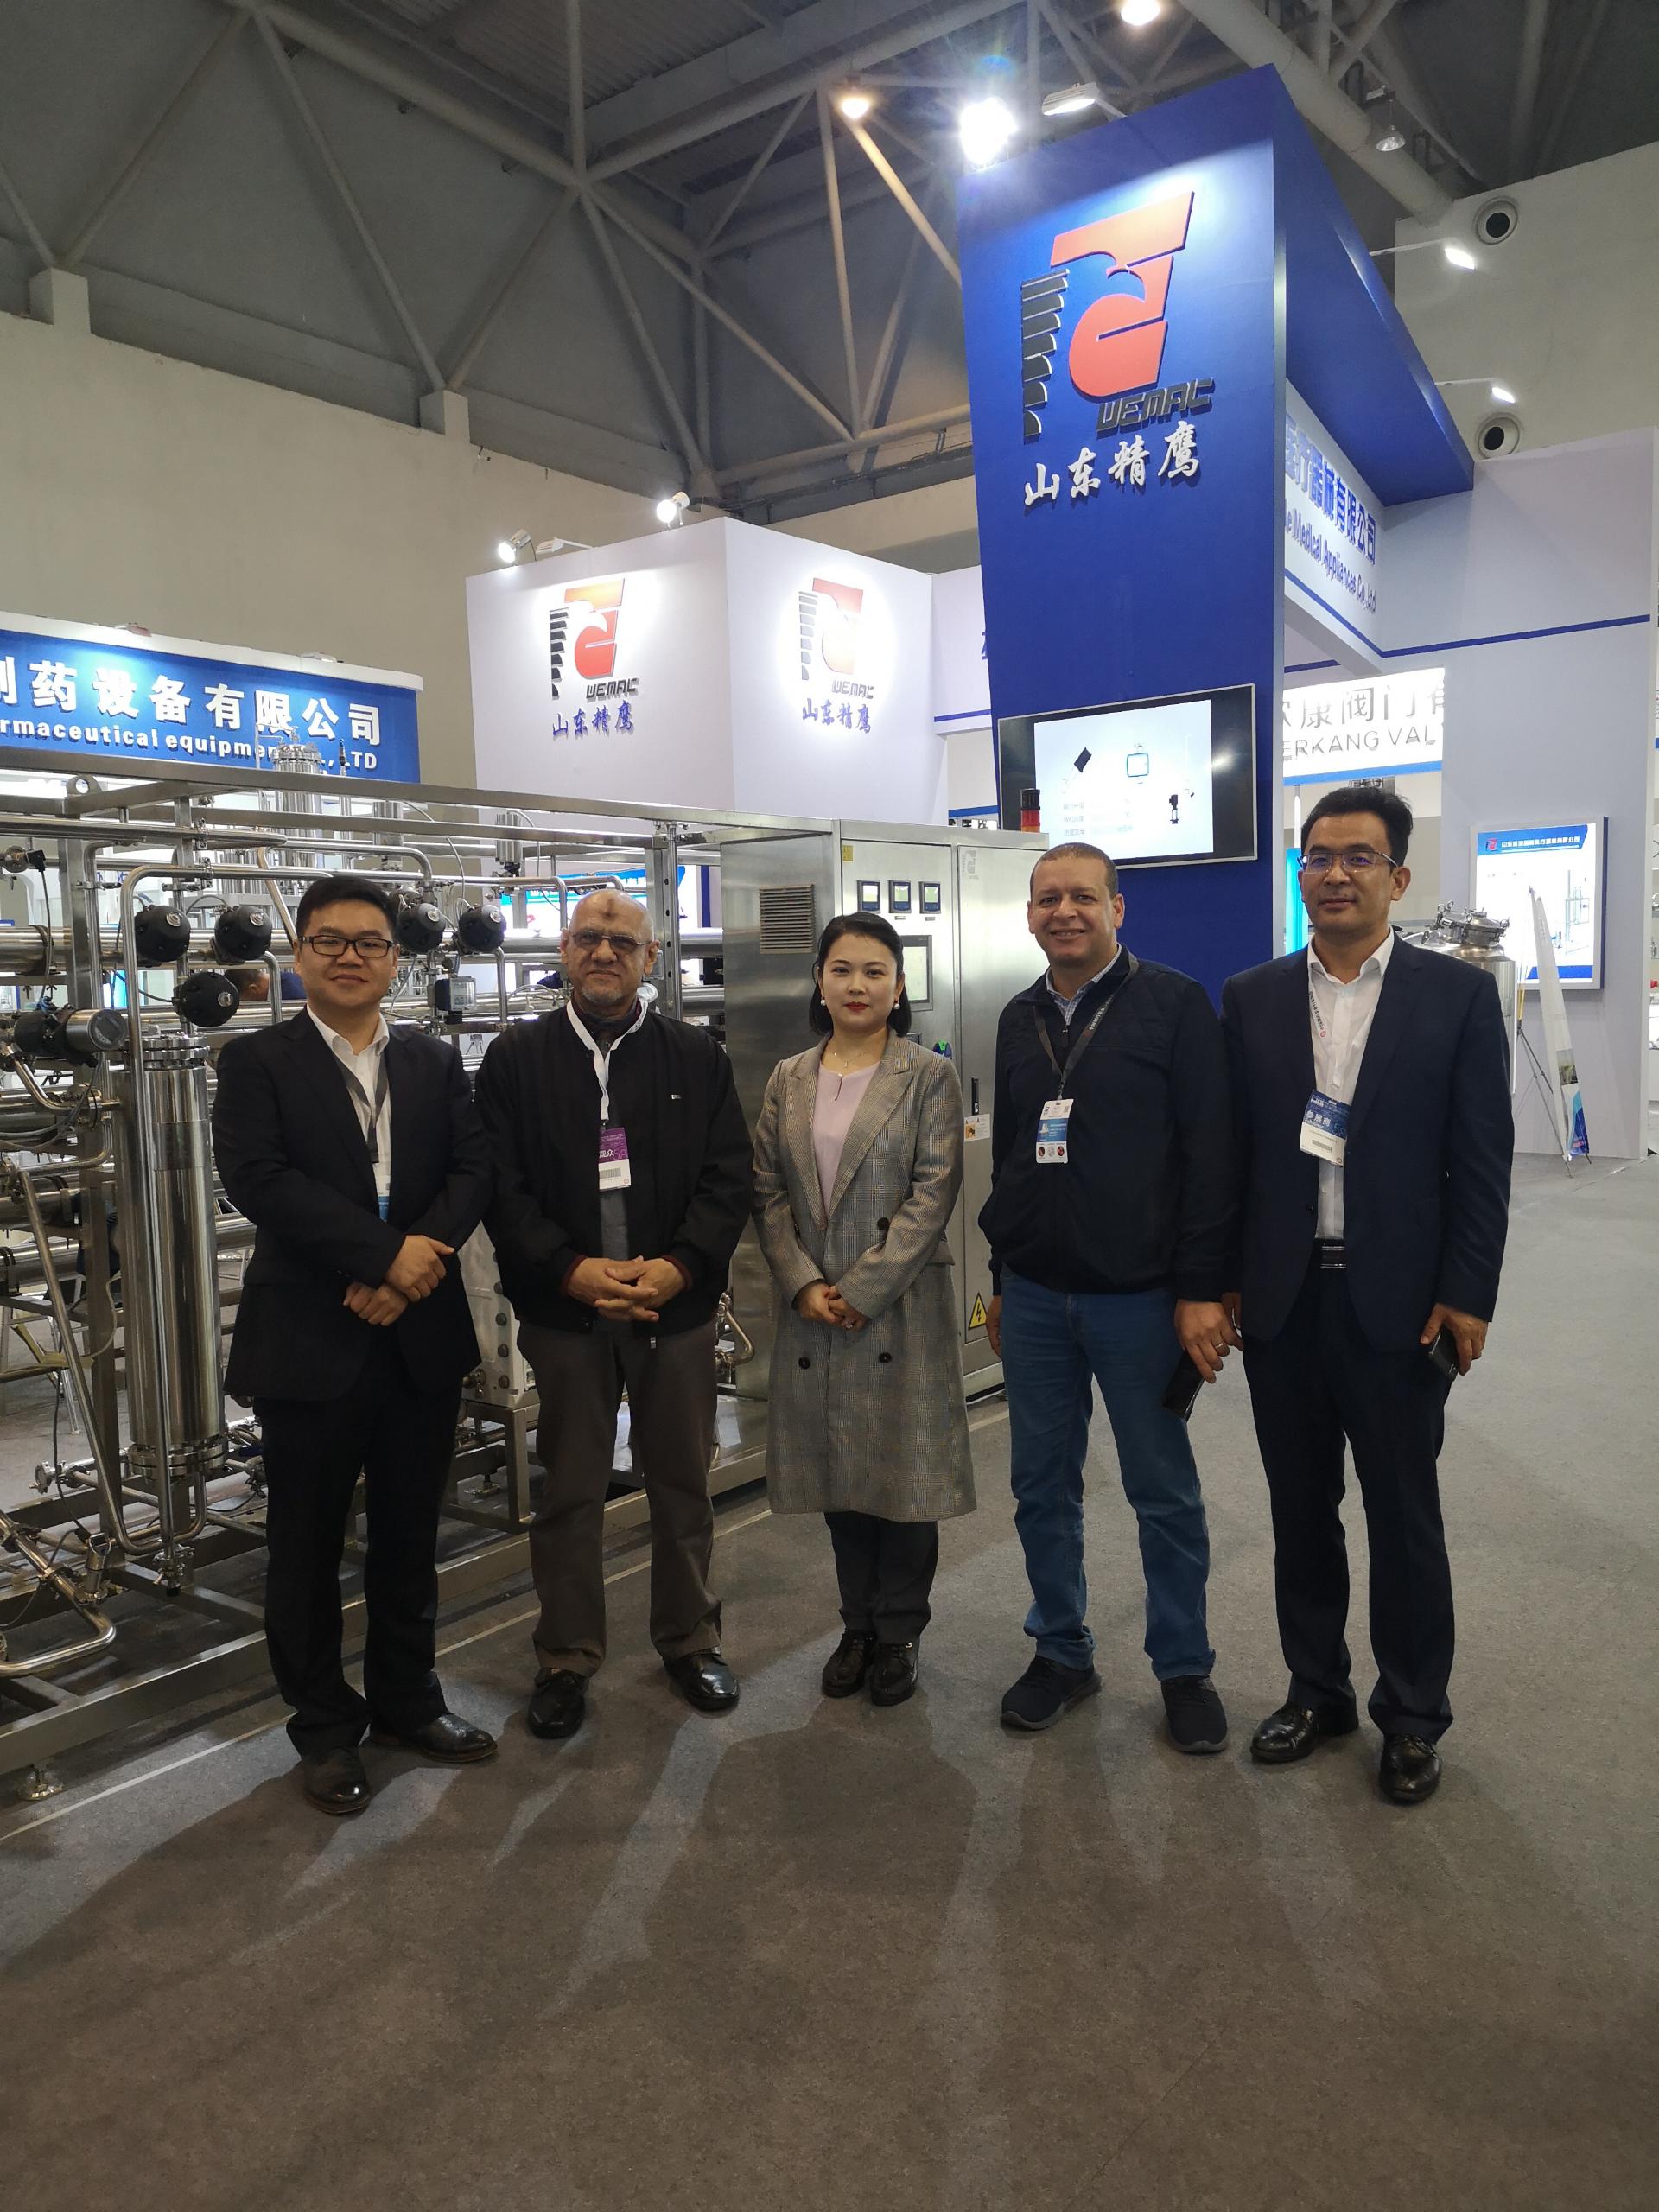 WEMAC is attending the CIPM. China International Pharmaceutical Machinery exhibition.